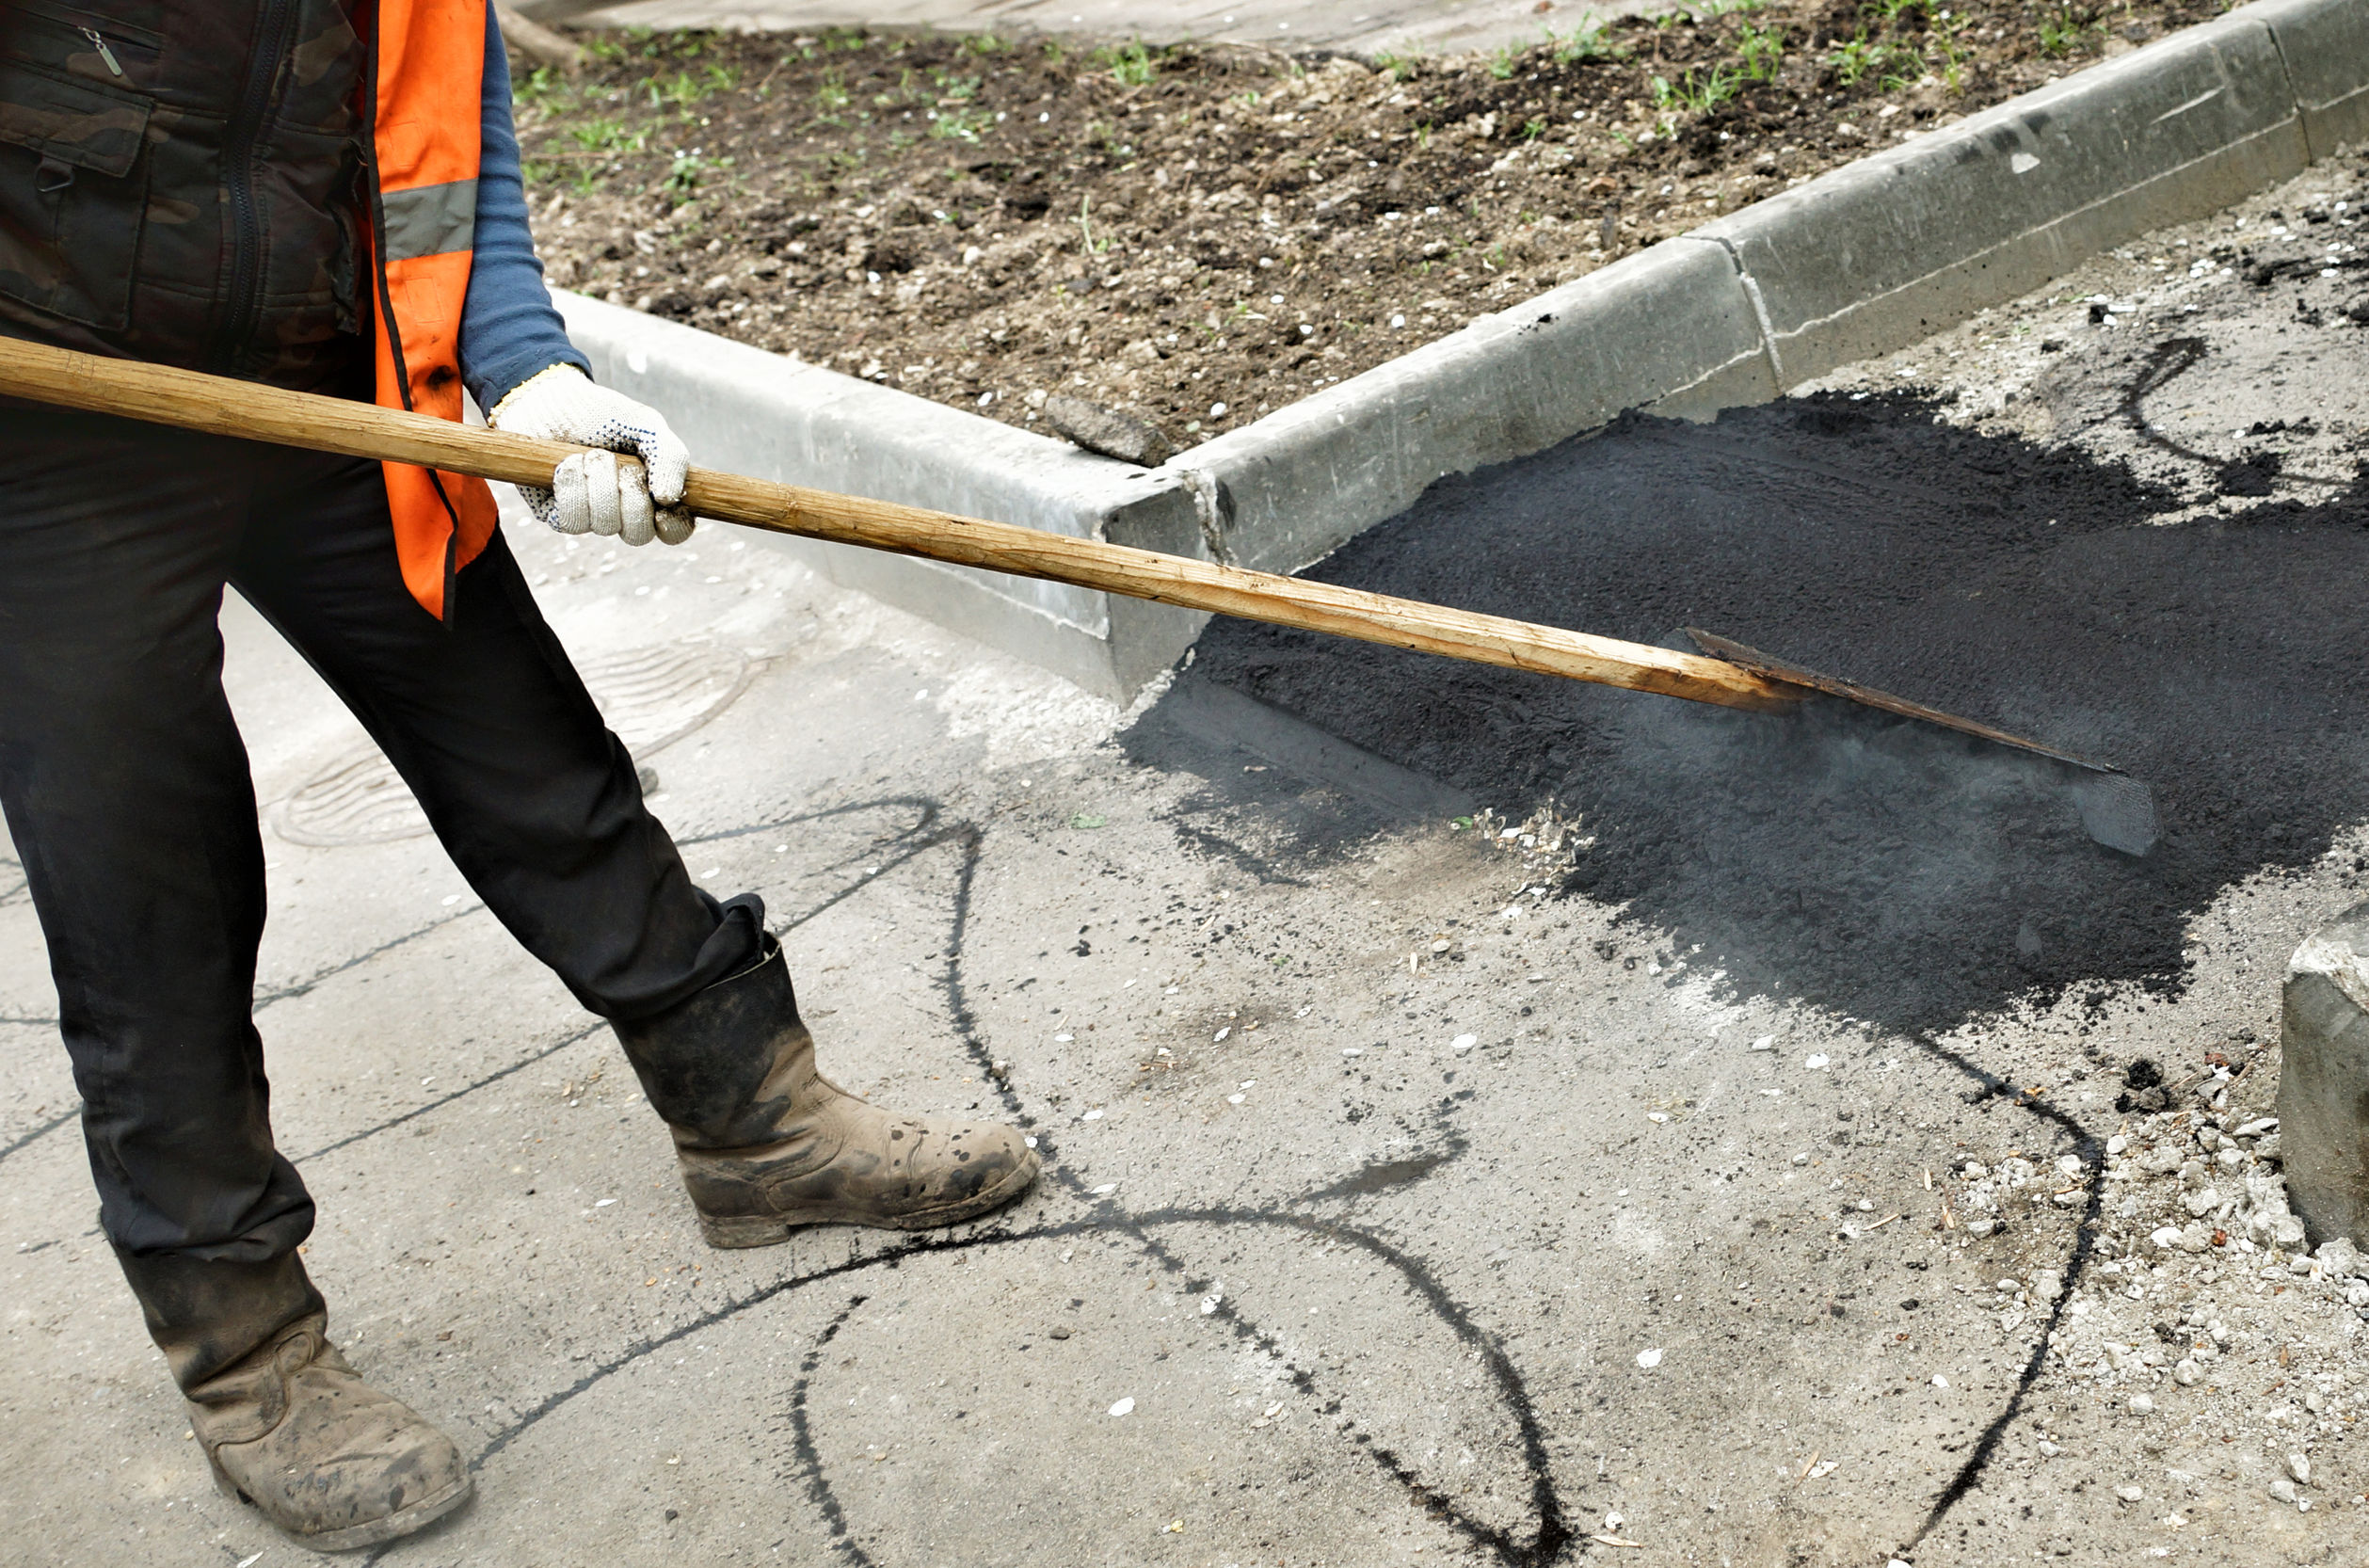 Worker using tool to level hot and steamy black asphalt